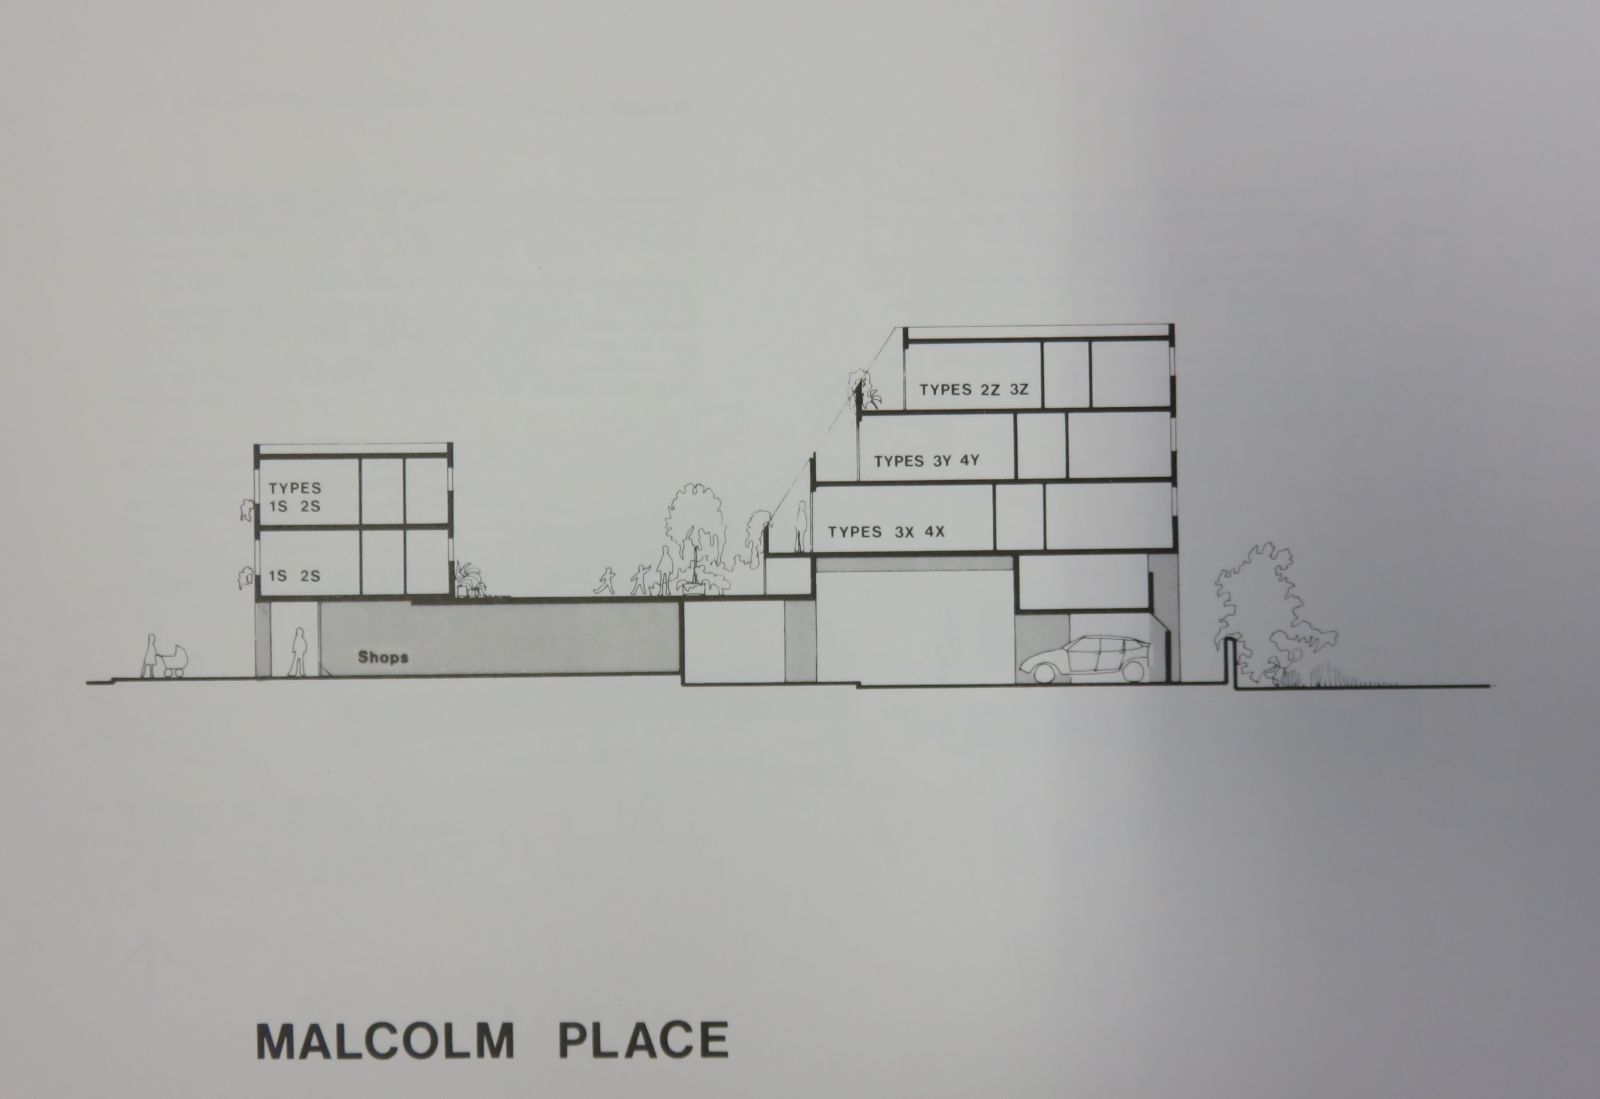 King Street Housing Society: elevation plan of Malcolm Place. (Archive ref: JCAD-3-CAM-KING-14-2-1977)